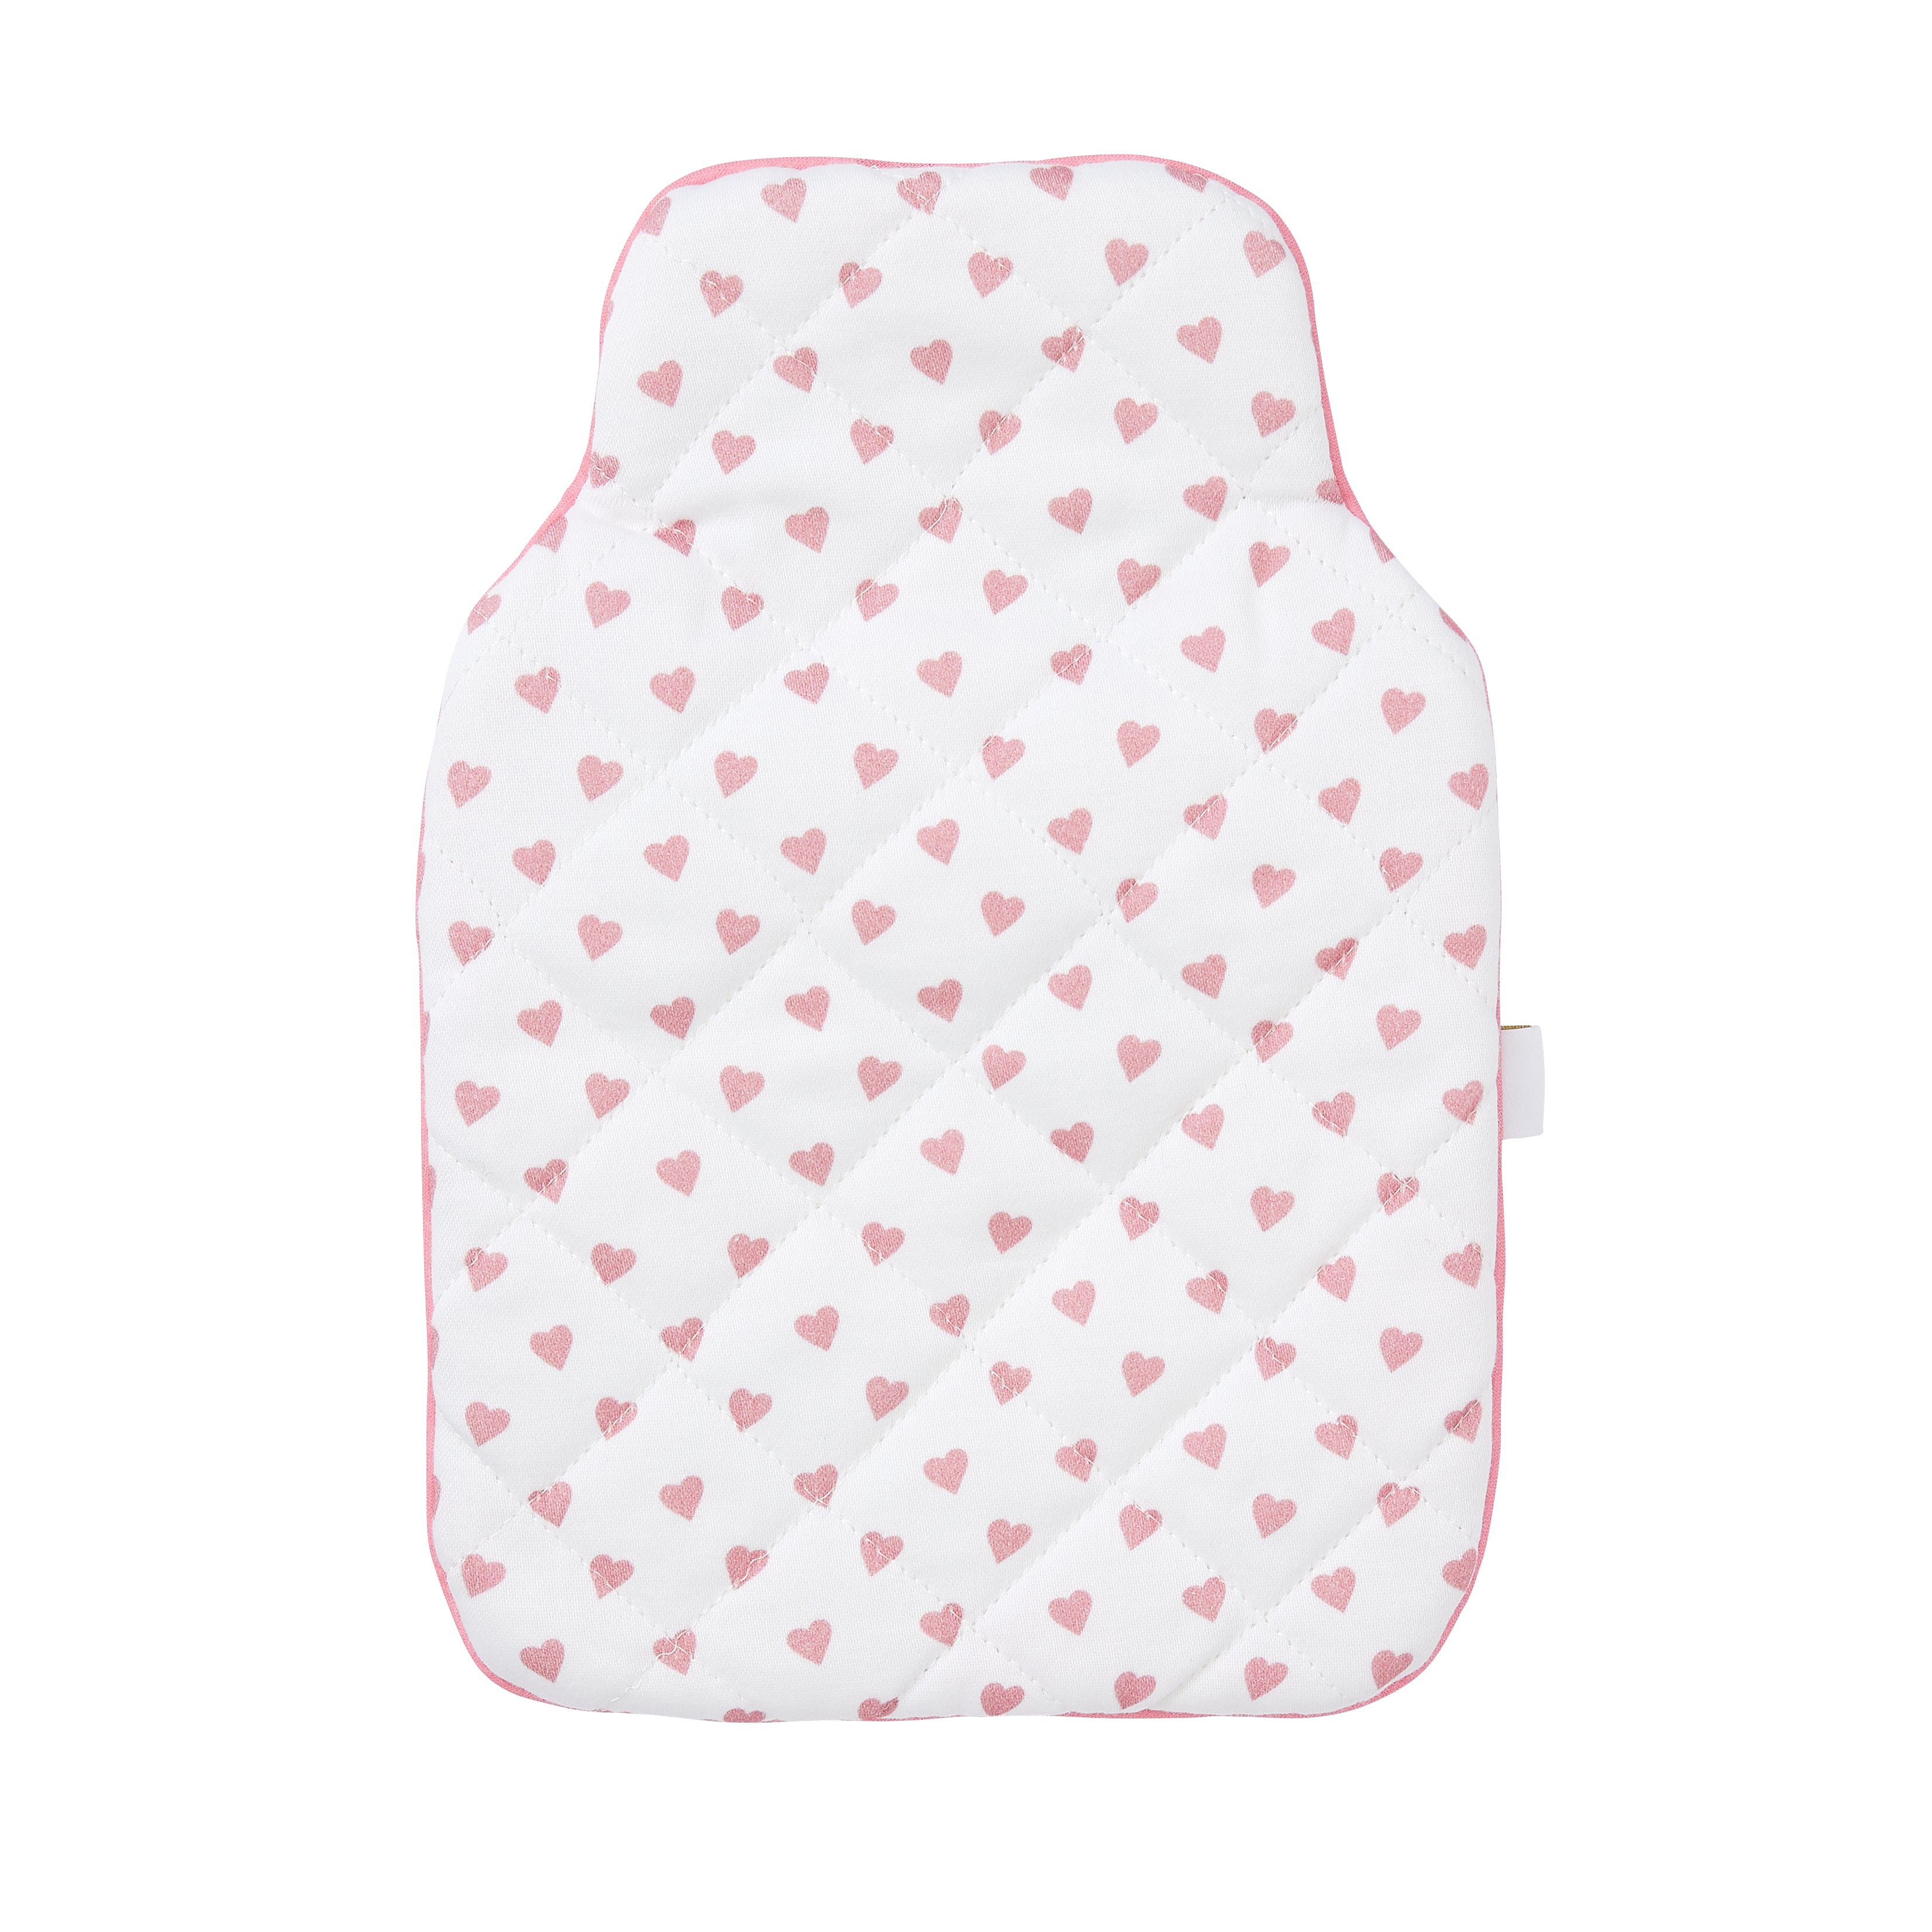 Mini Hot Water Bottle and Cover - Pink Heart